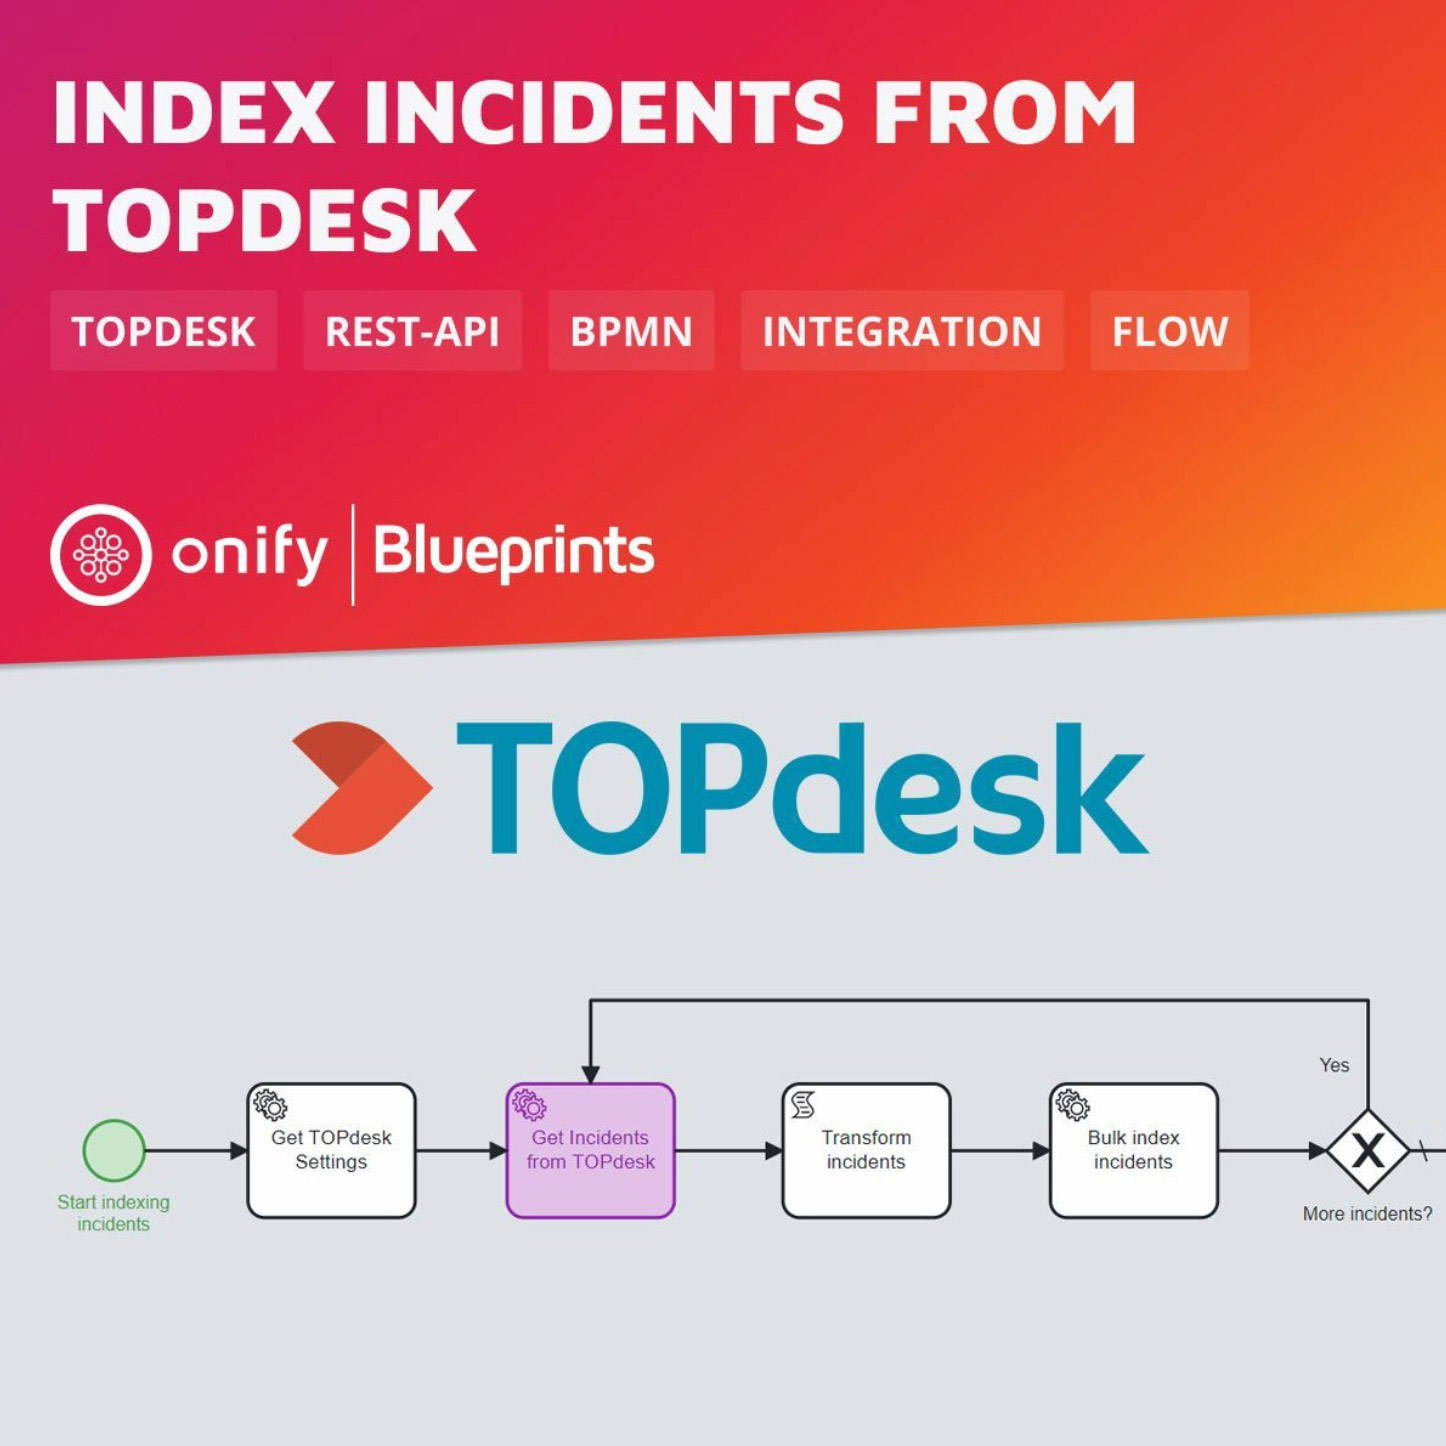 Onify Blueprint – Index incidents from TOPdesk